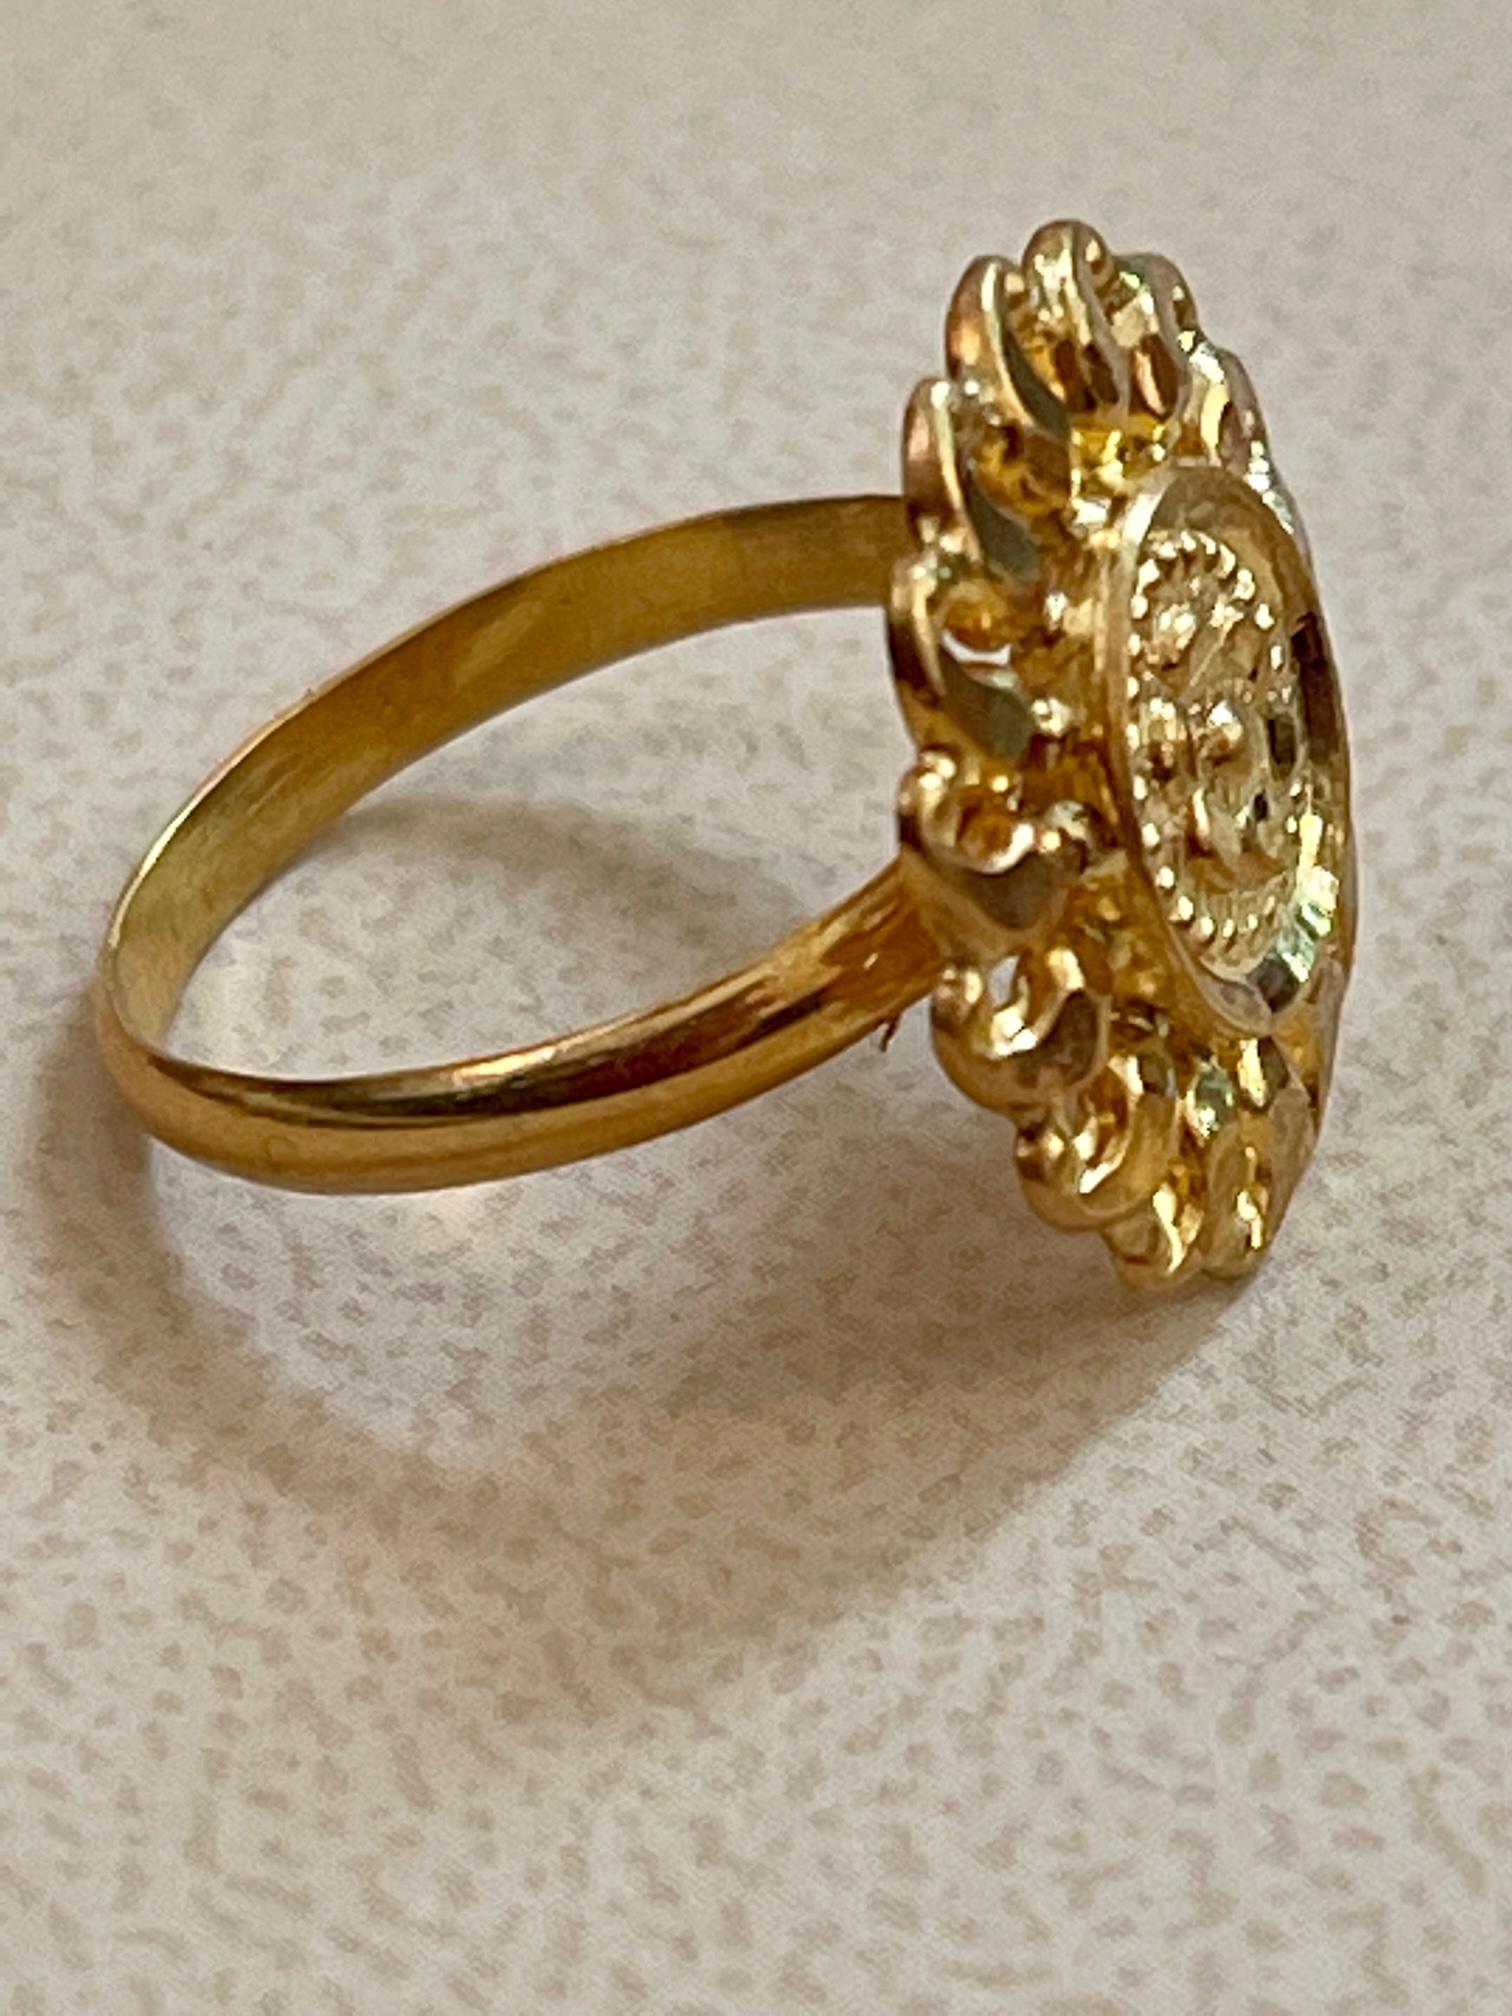 22 Karat Yellow Gold Flower Ring In Excellent Condition For Sale In New York, NY